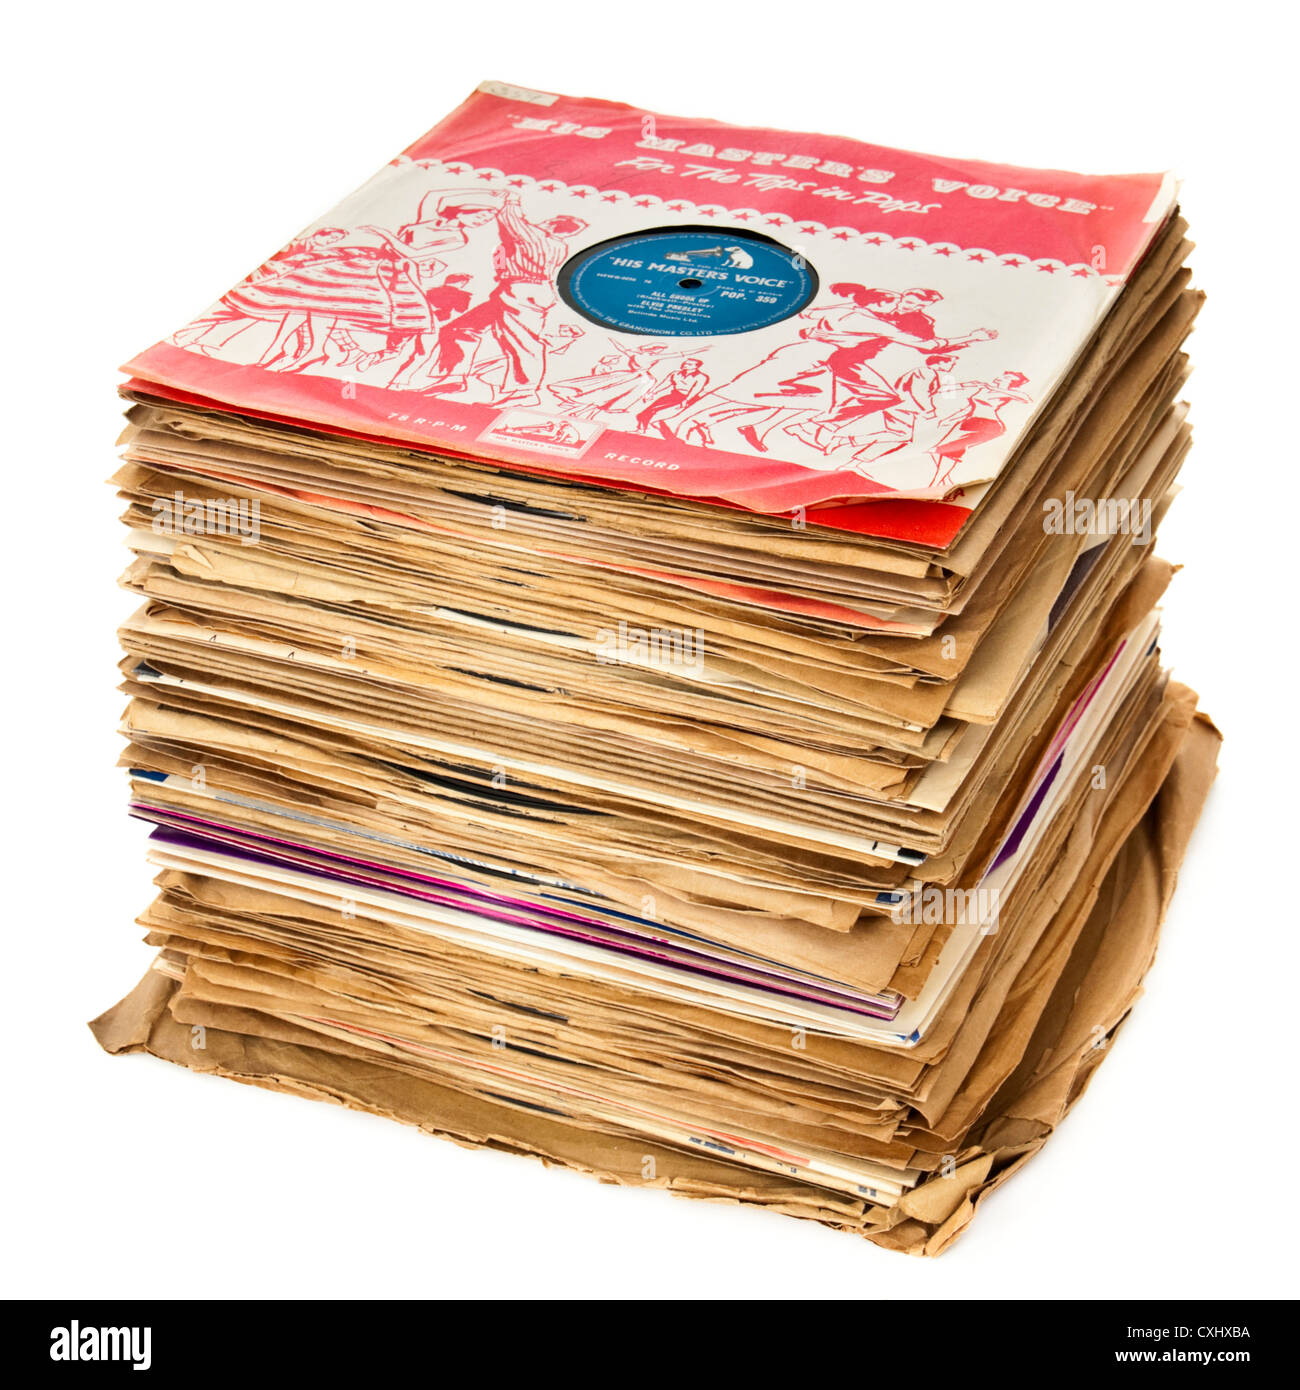 Collection of vintage 78rpm records from the 1950's, with Elvis Presley's 'All Shook Up' on top Stock Photo